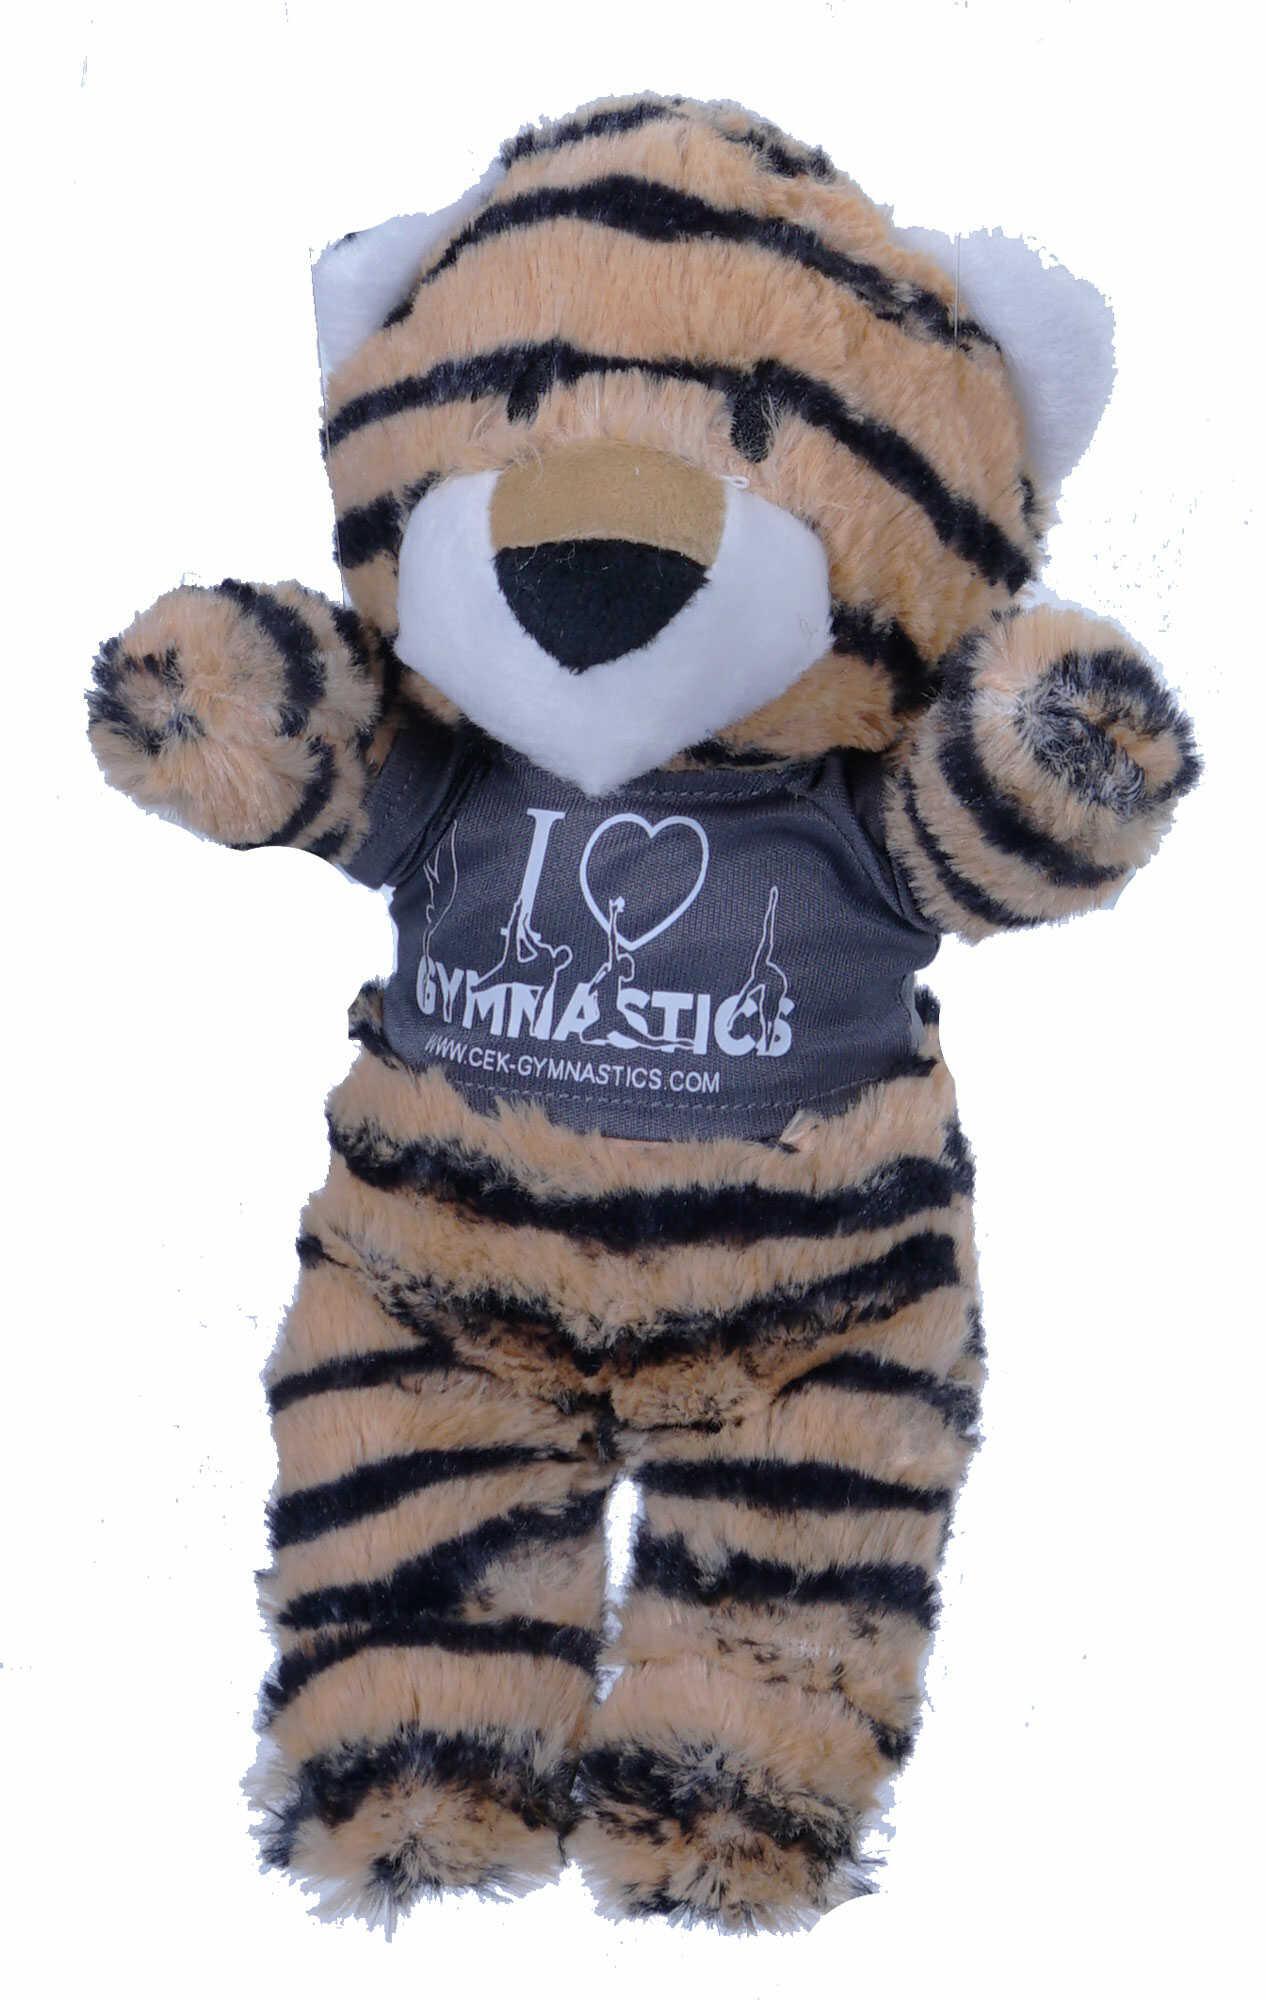 Cuddly tiger plush toy with promo t-shirt